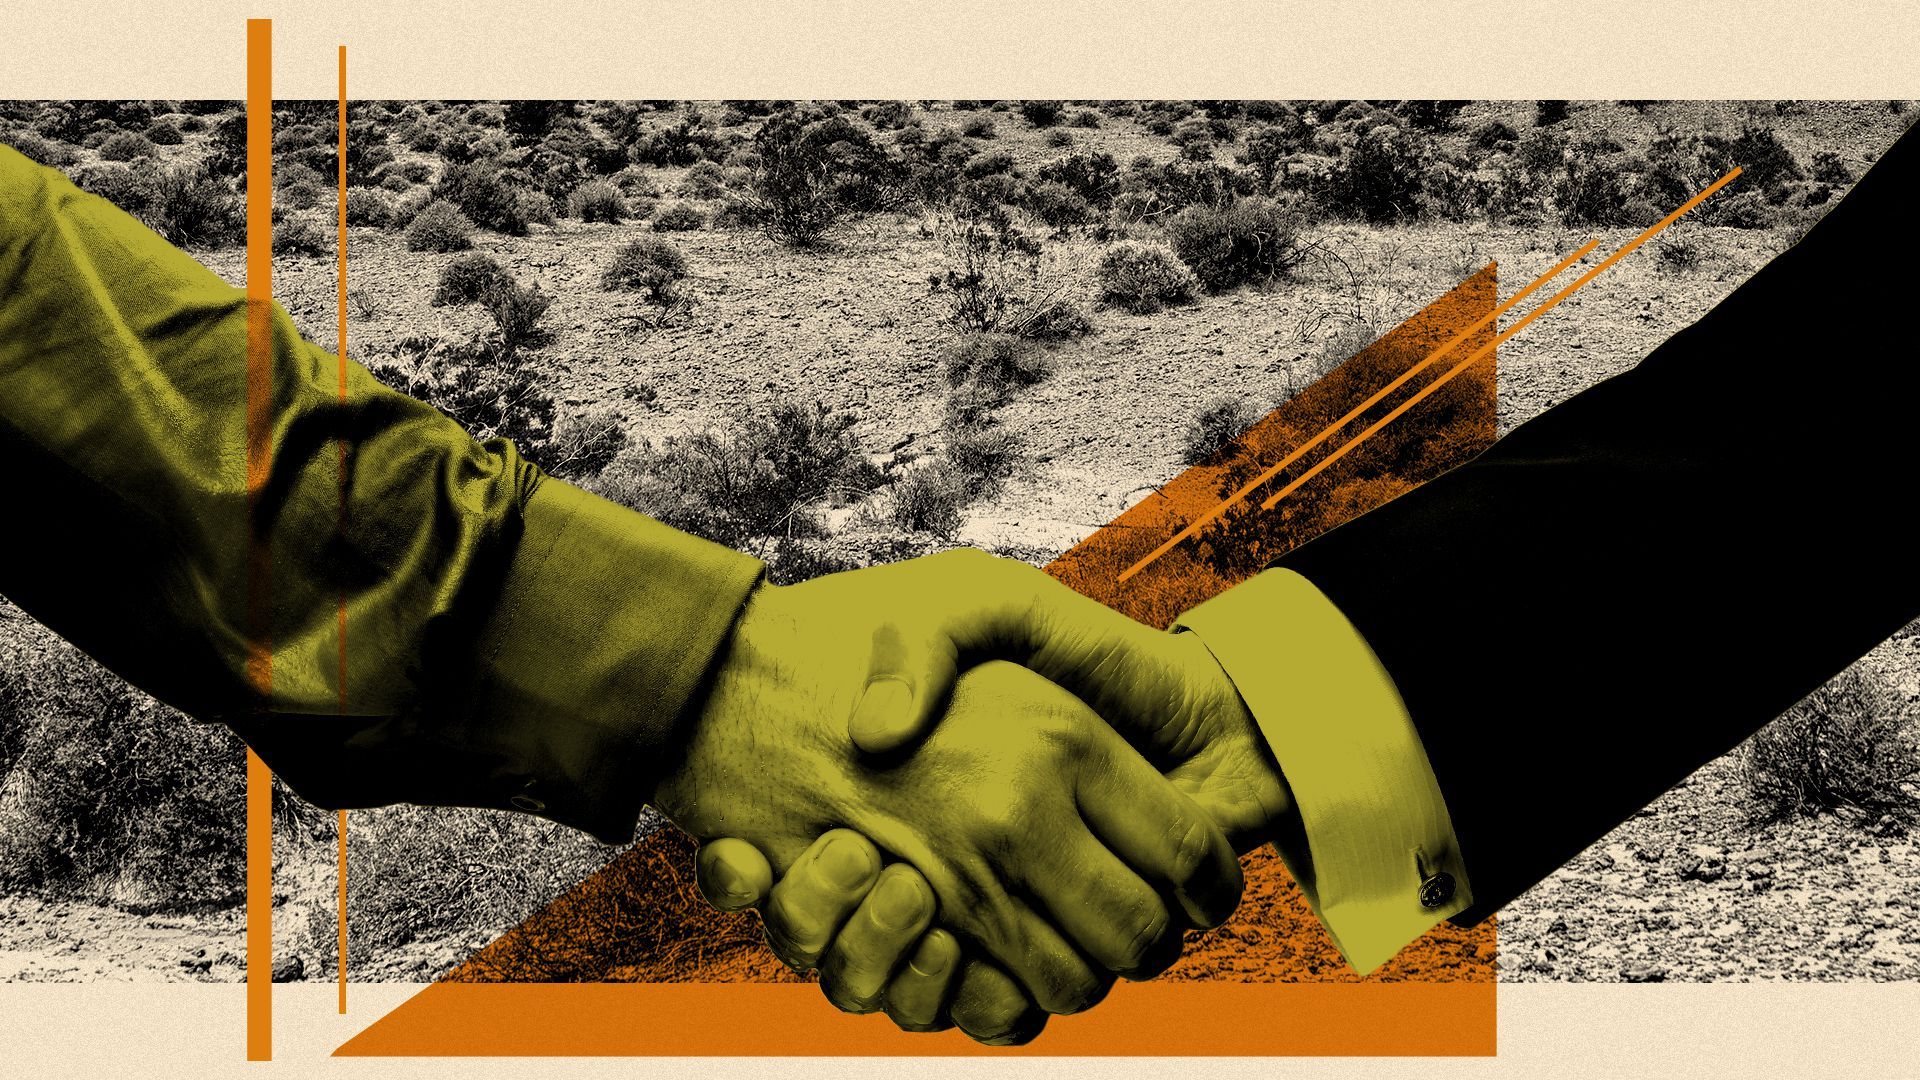 Illustration collage of a handshake over a dry desert landscape and geometric shape